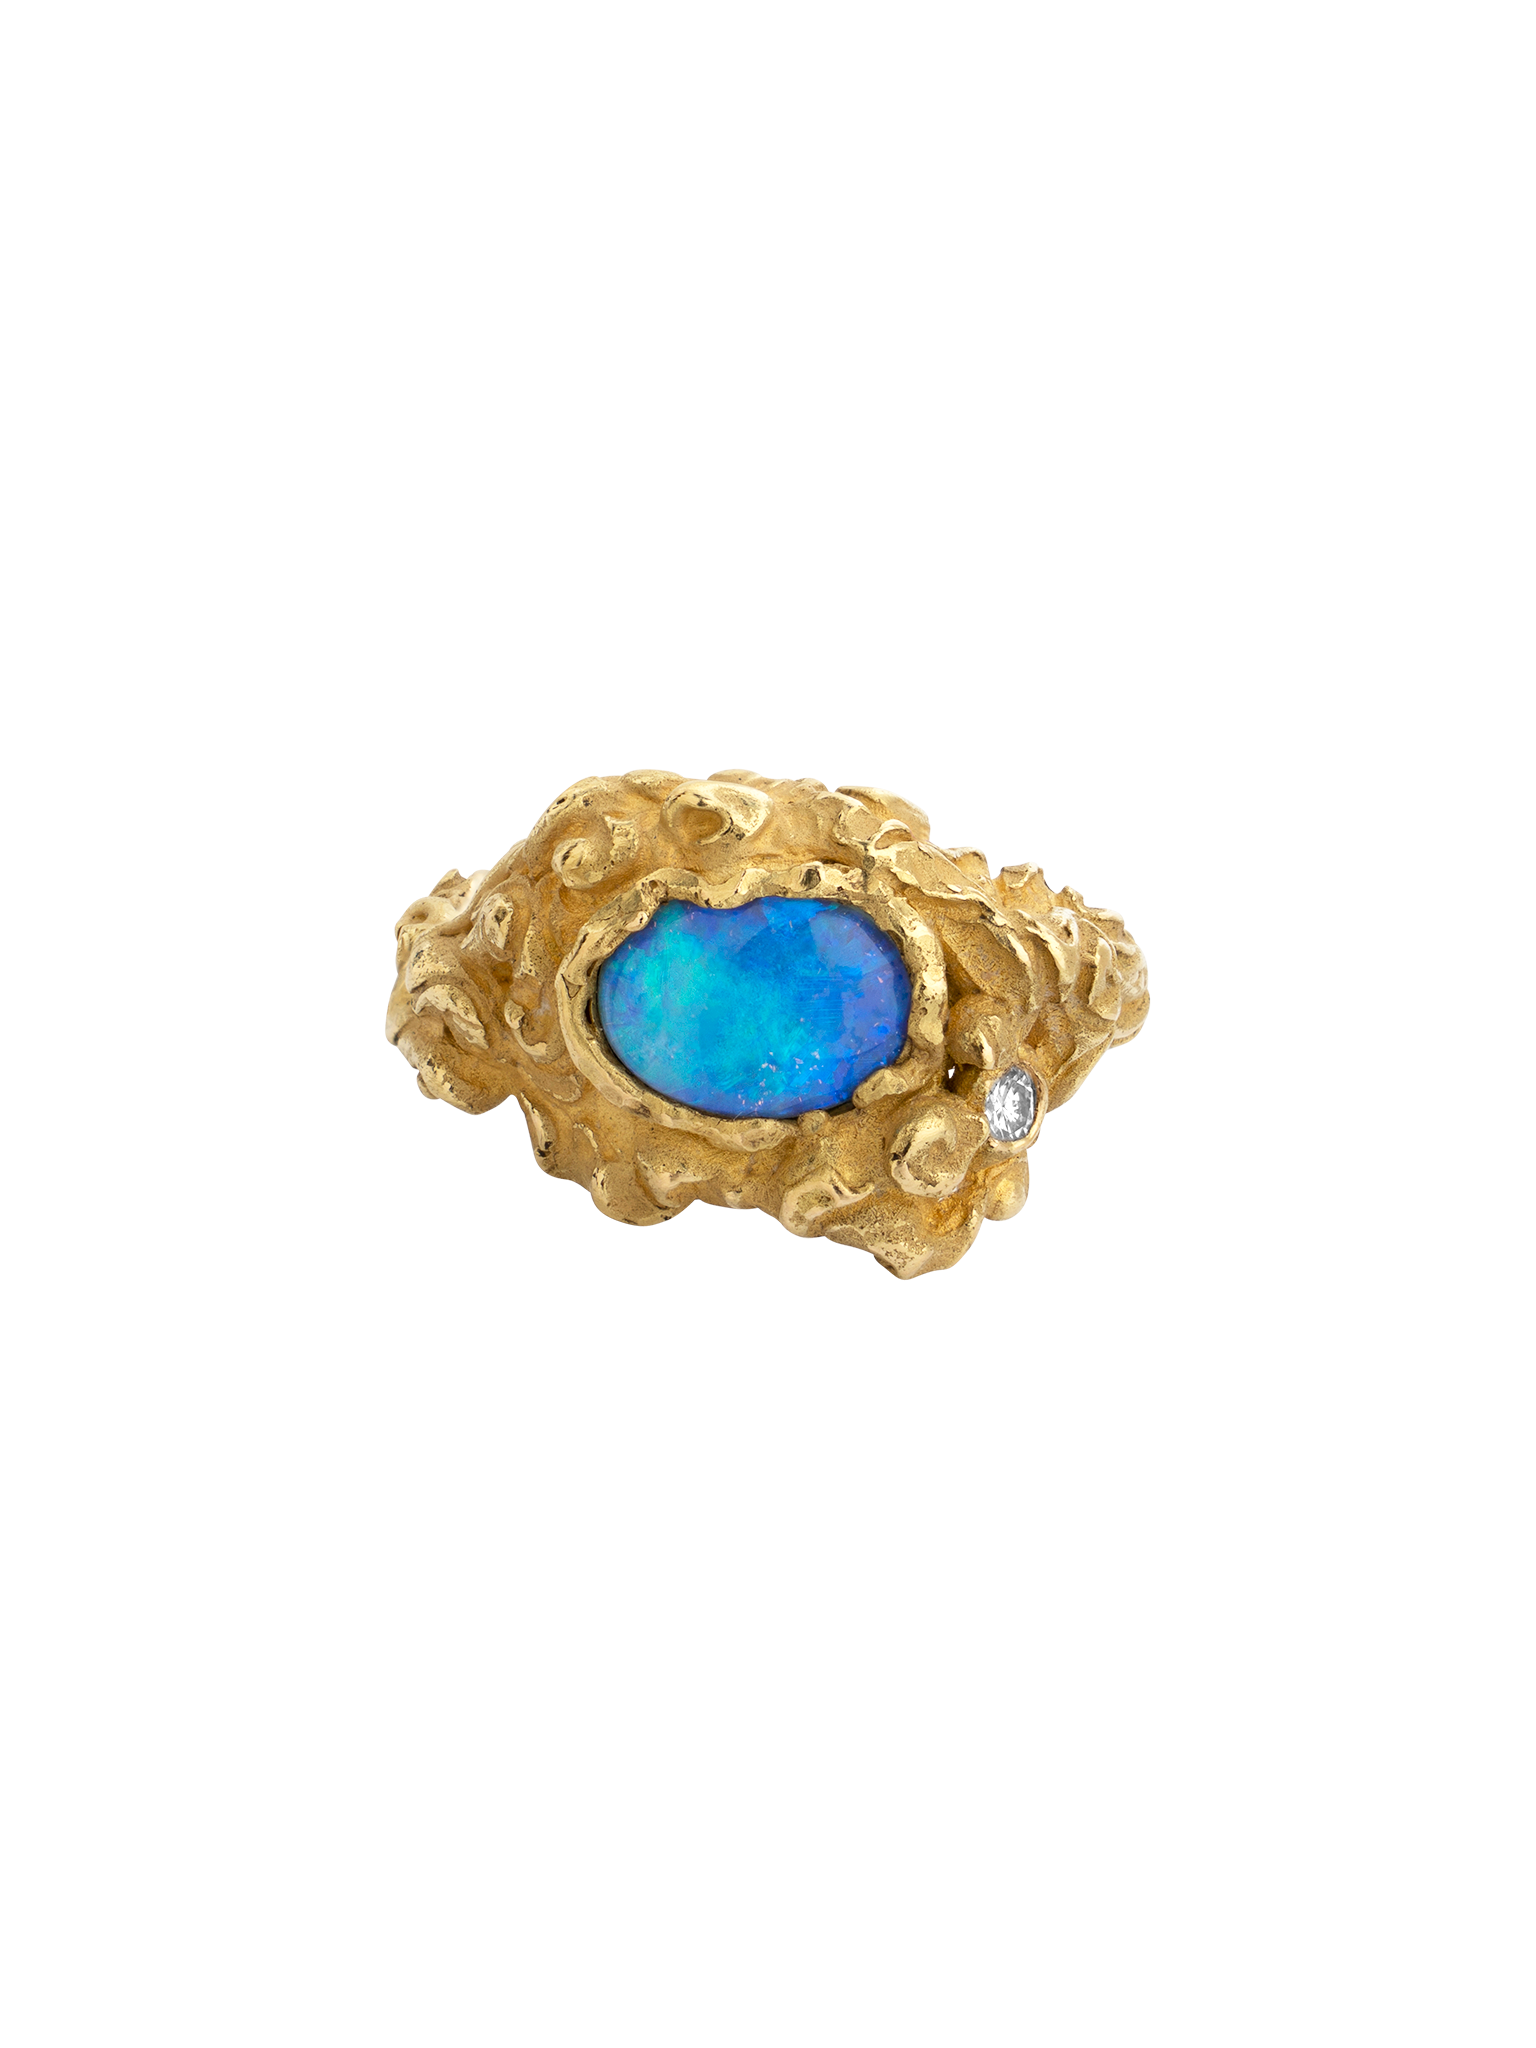 Florid opal and diamond ring